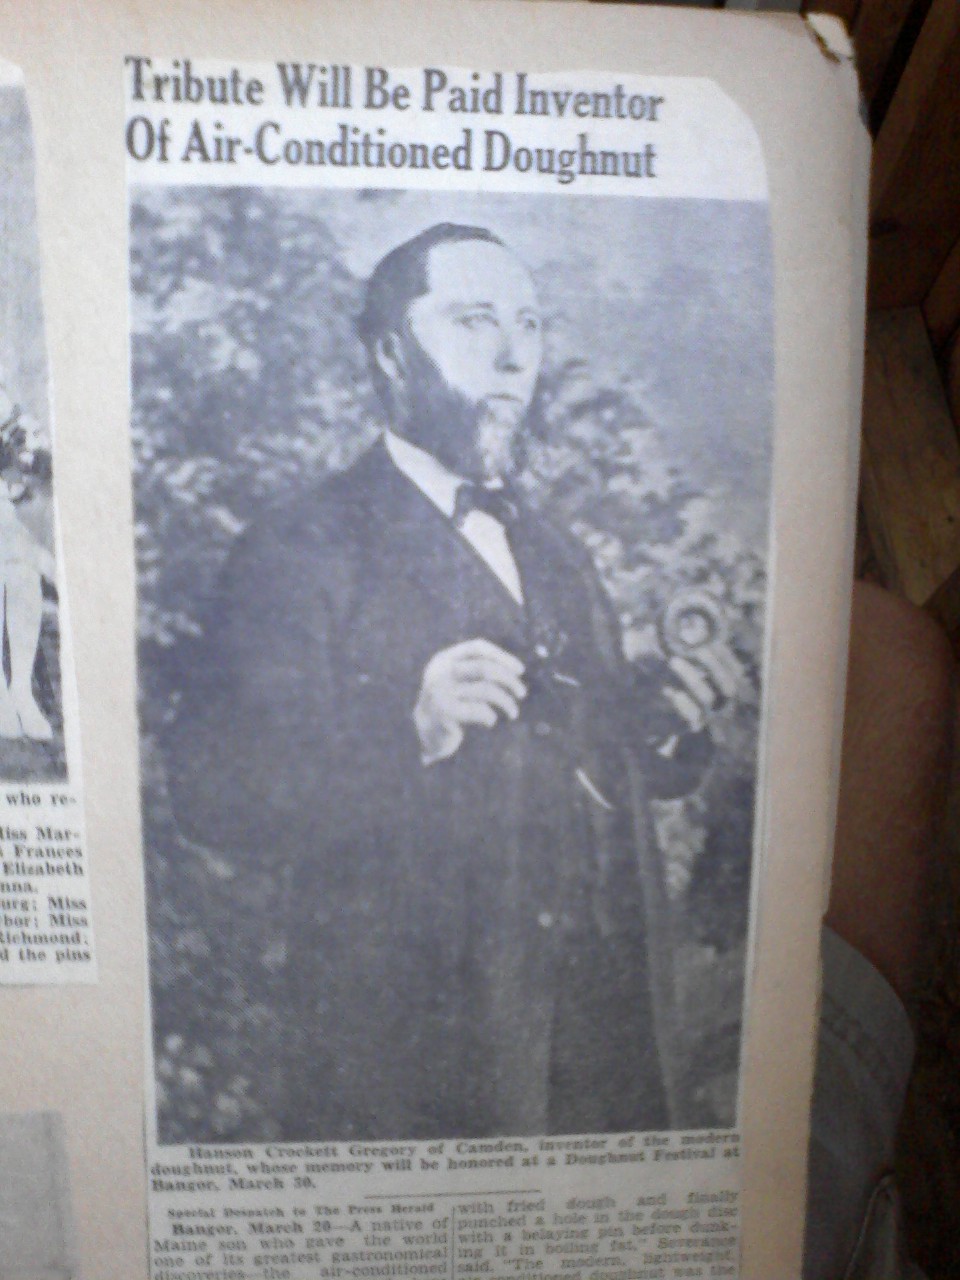 Clipping from a local Maine paper in the 1930's. I have no idea what this is but apperntly this dude, Hanson Crockett Gregory, invented the modern doughnut